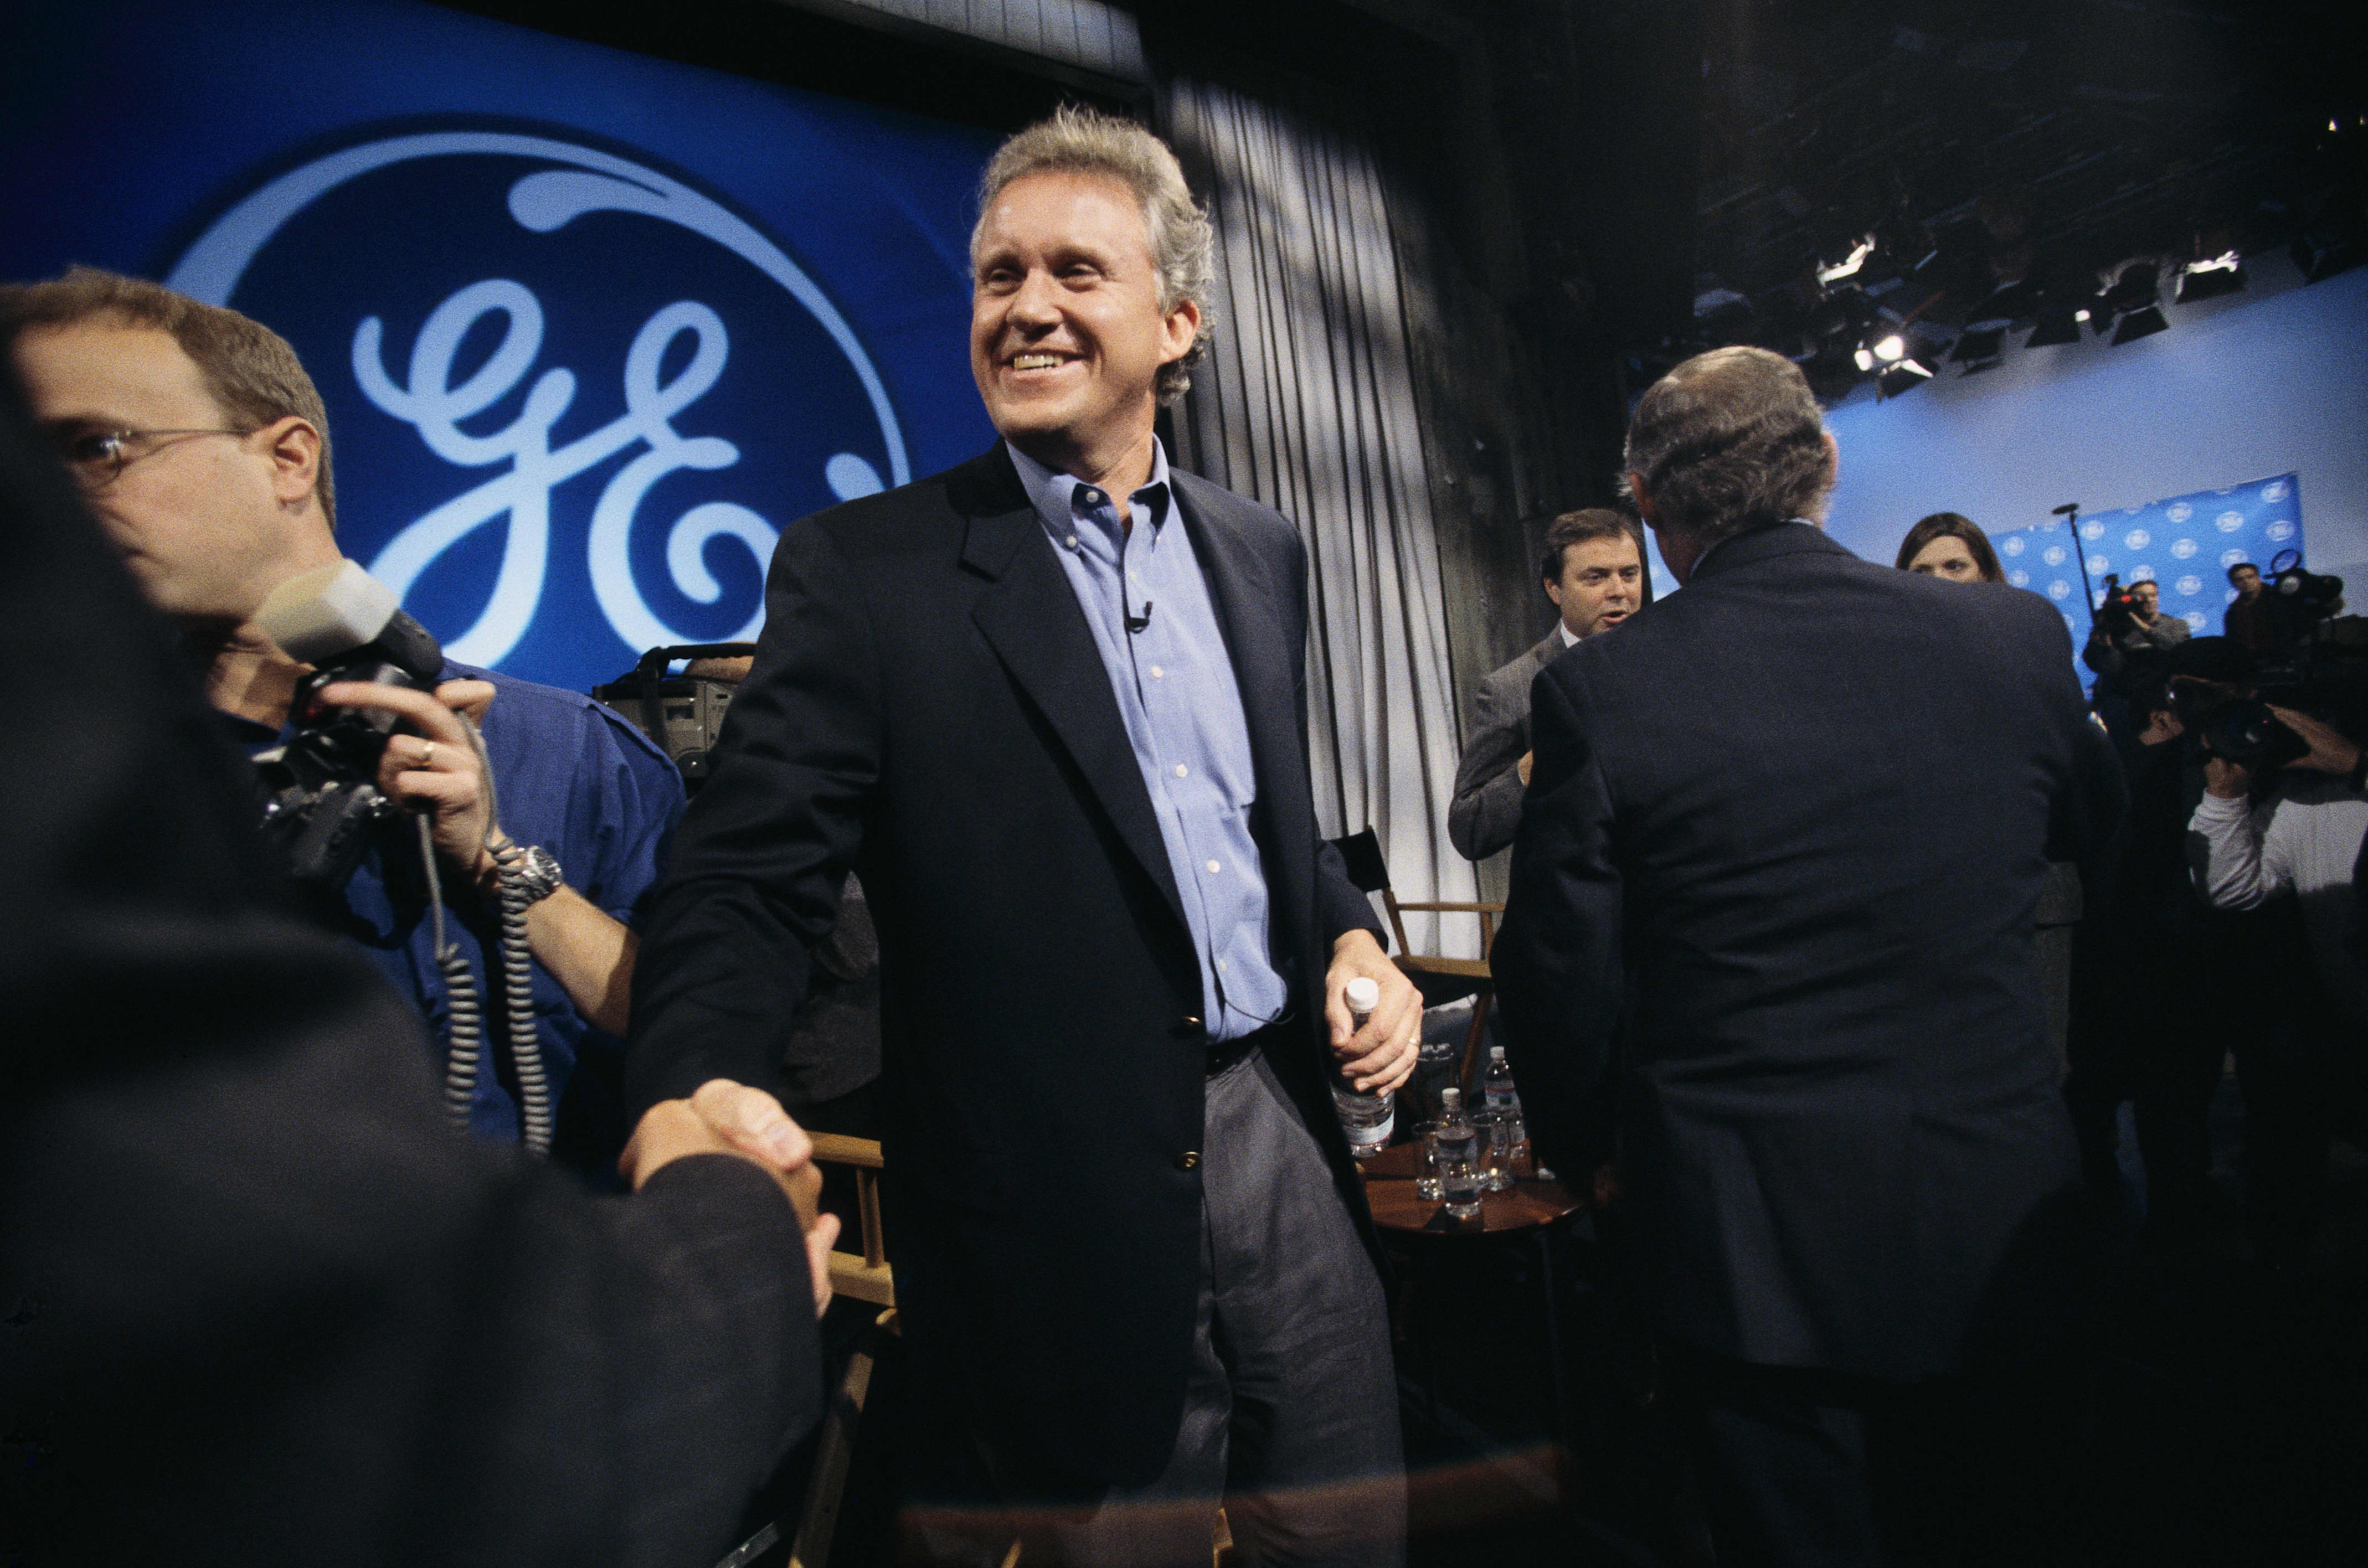 Former GE CEO Jeff Immelt says “totally unhappy” with my management story